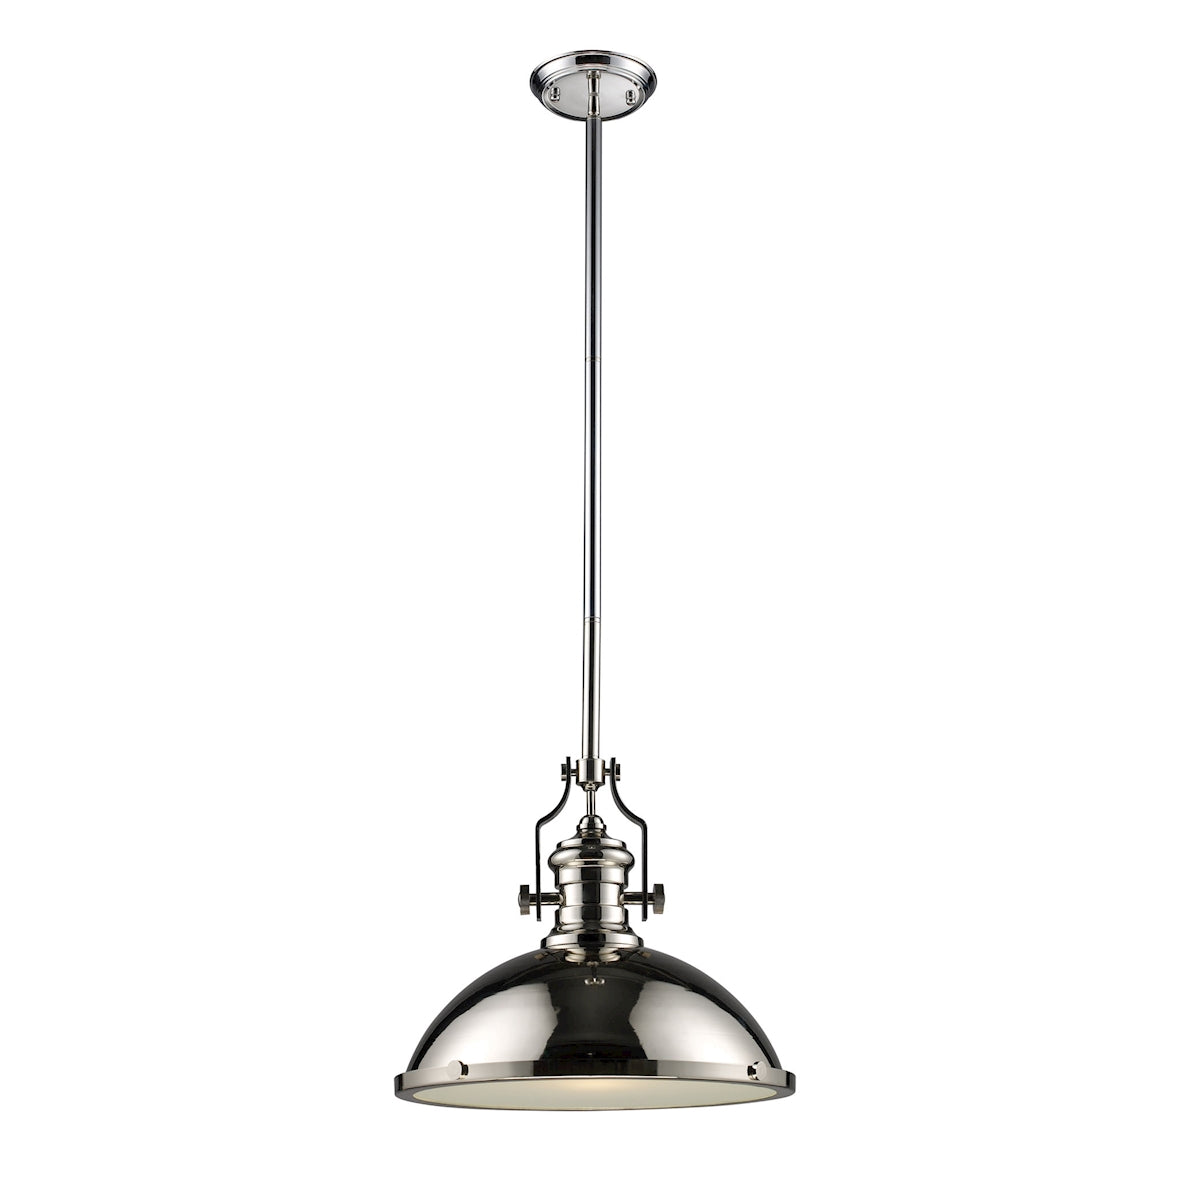 ELK Lighting 66118-1 Chadwick 1-Light Pendant in Polished Nickel with Matching Shades